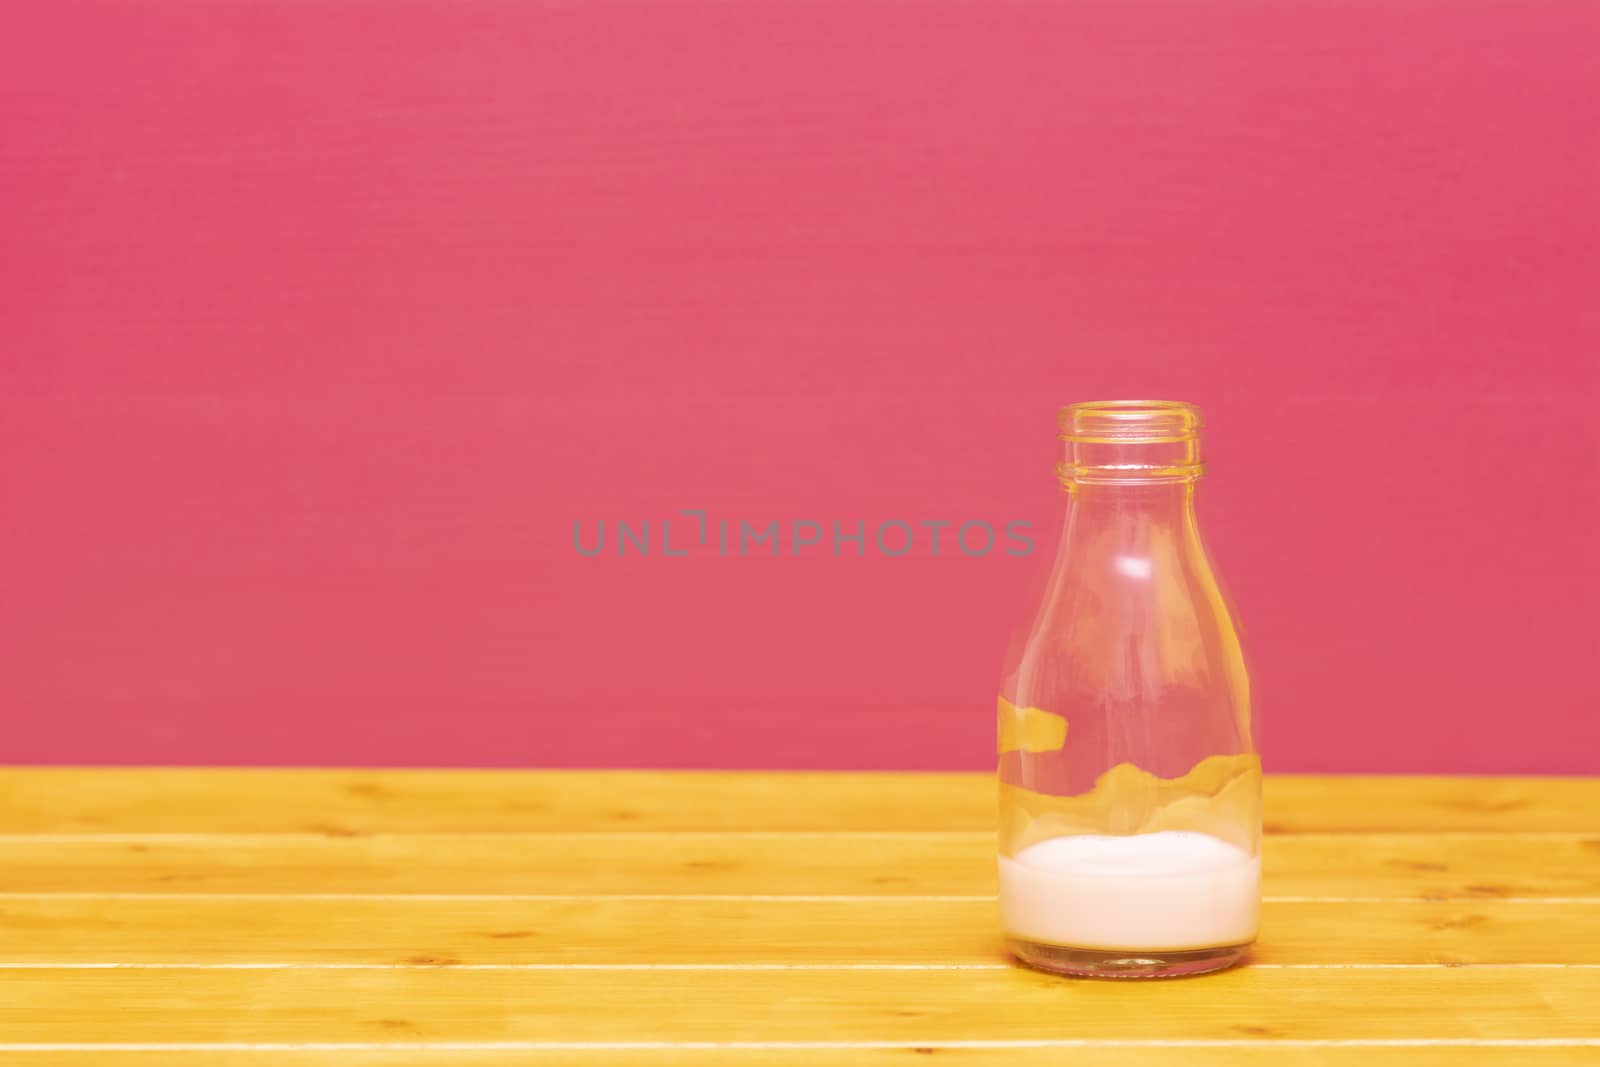 One-third pint glass milk bottle with dregs of strawberry milkshake, on a wooden table against a pink painted background